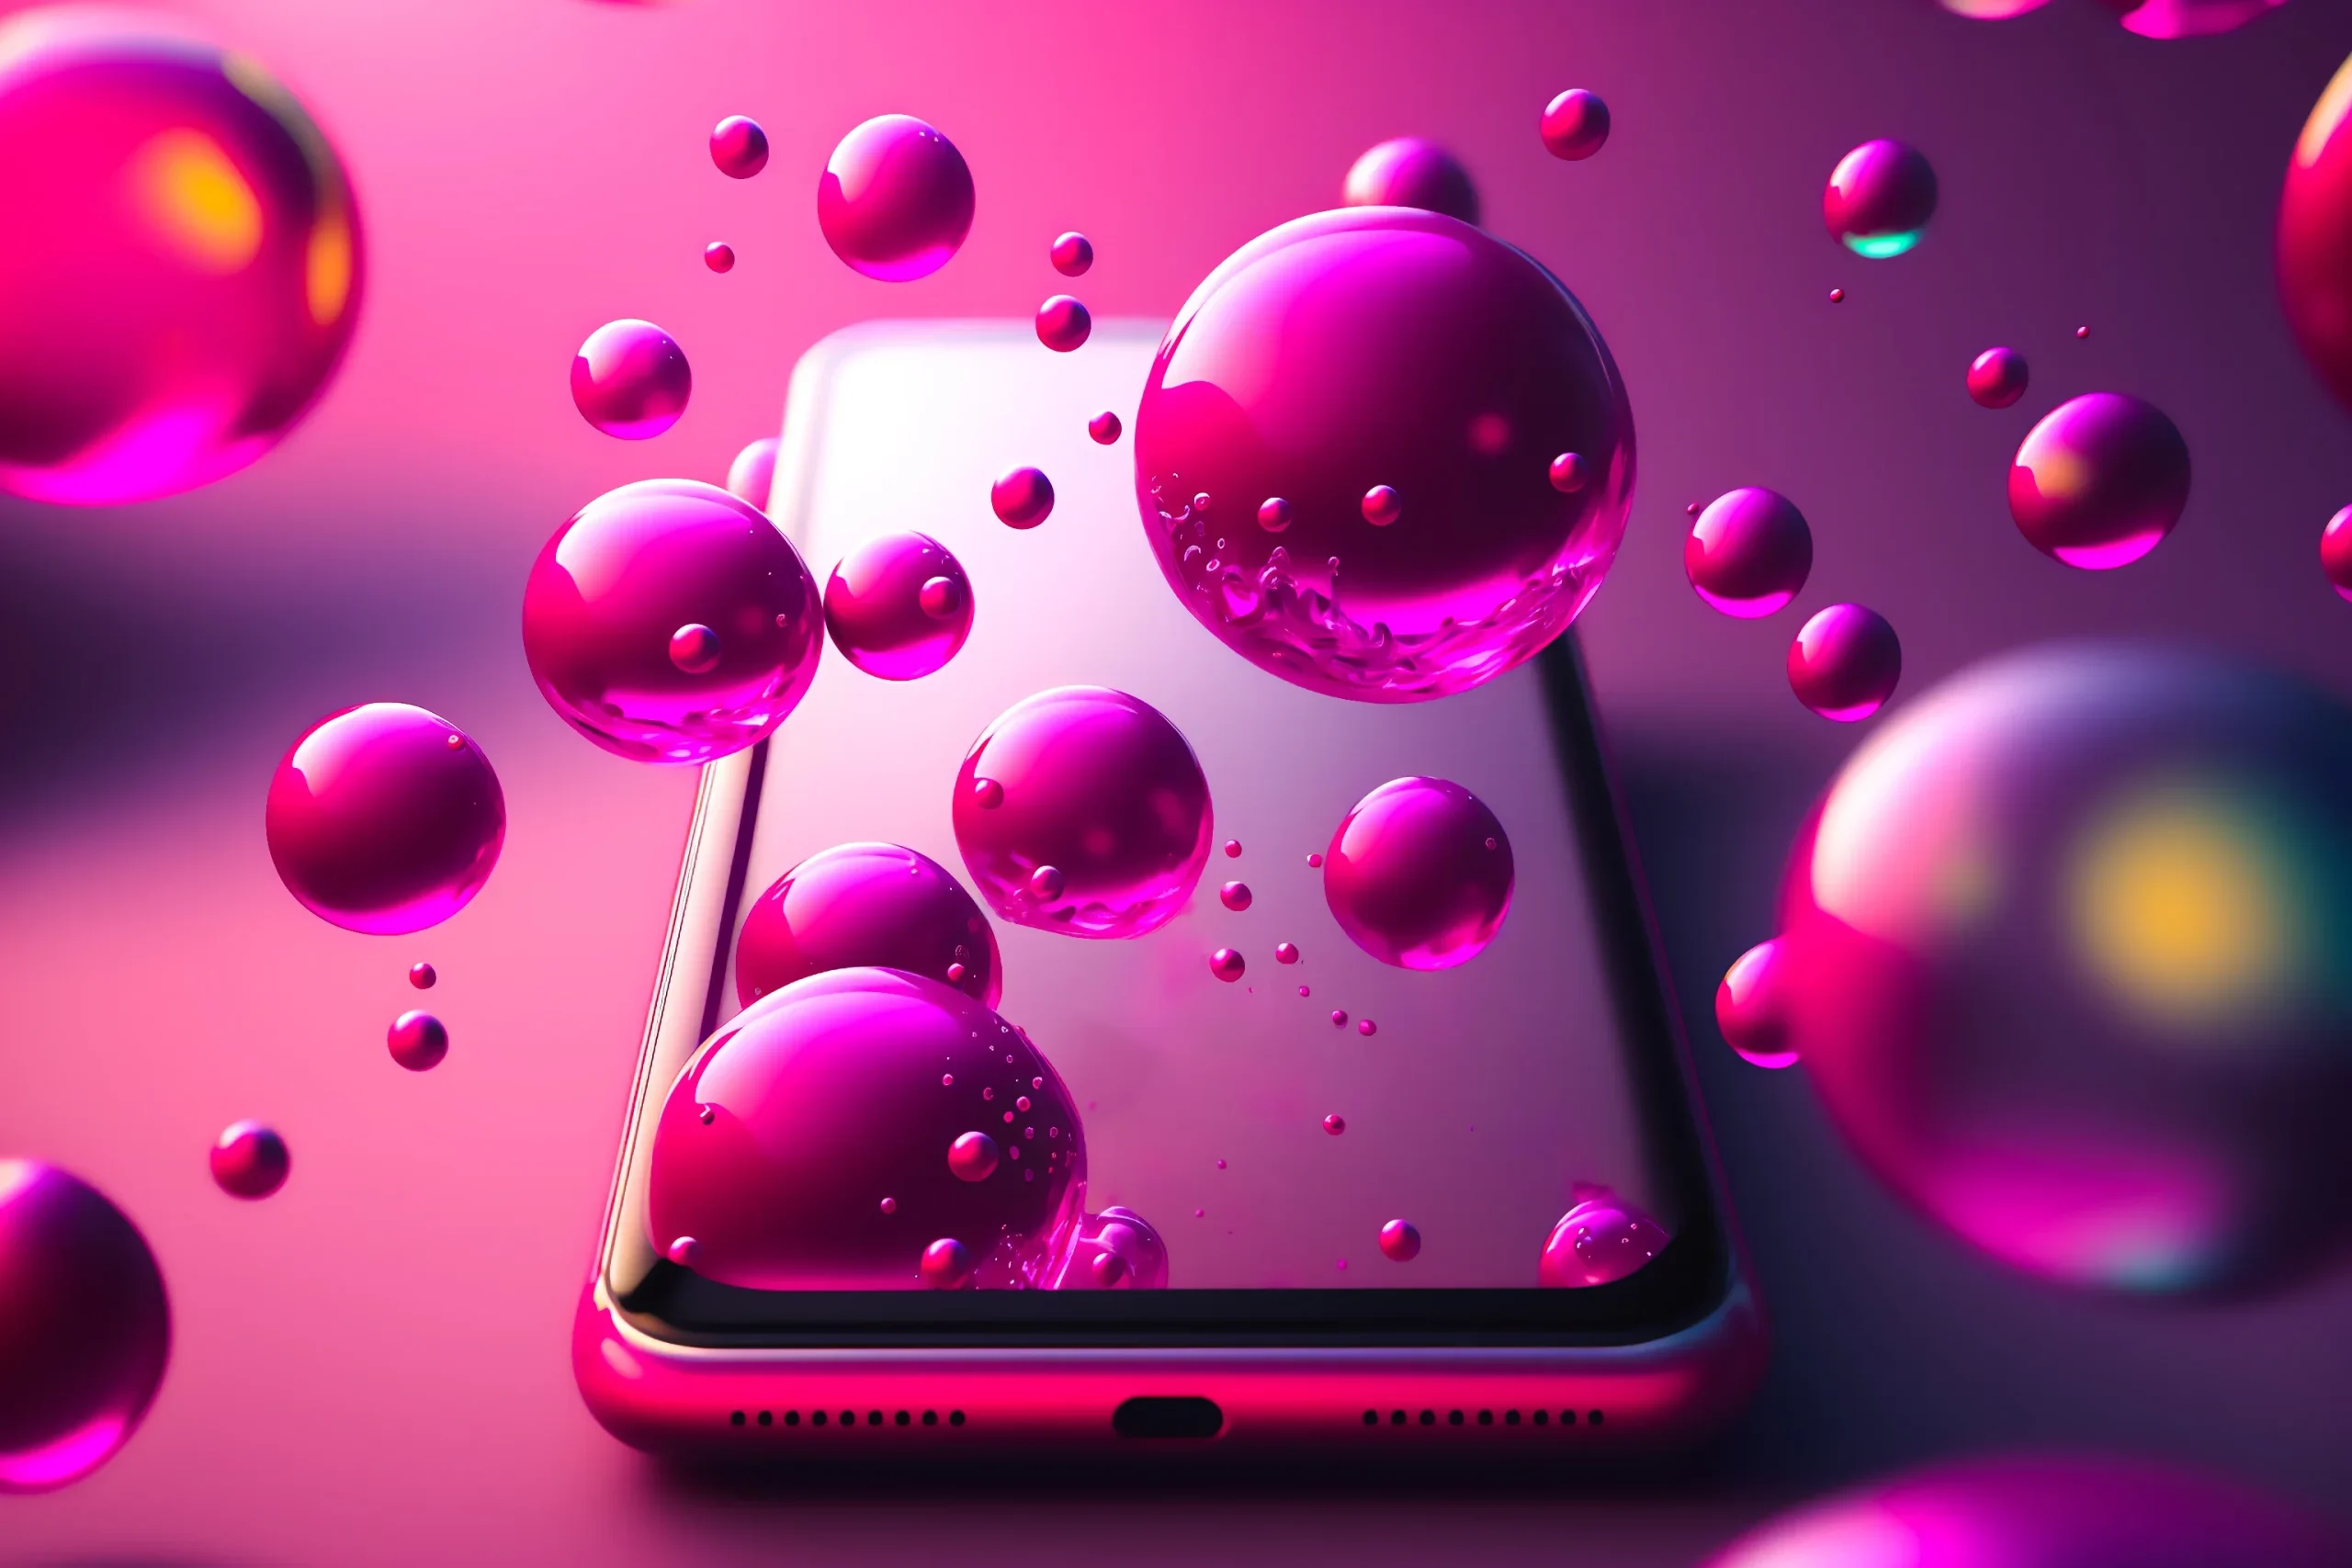 mobile-phone-background-with-floating-magenta-spheres-cell-phone-technology-with-copy-space